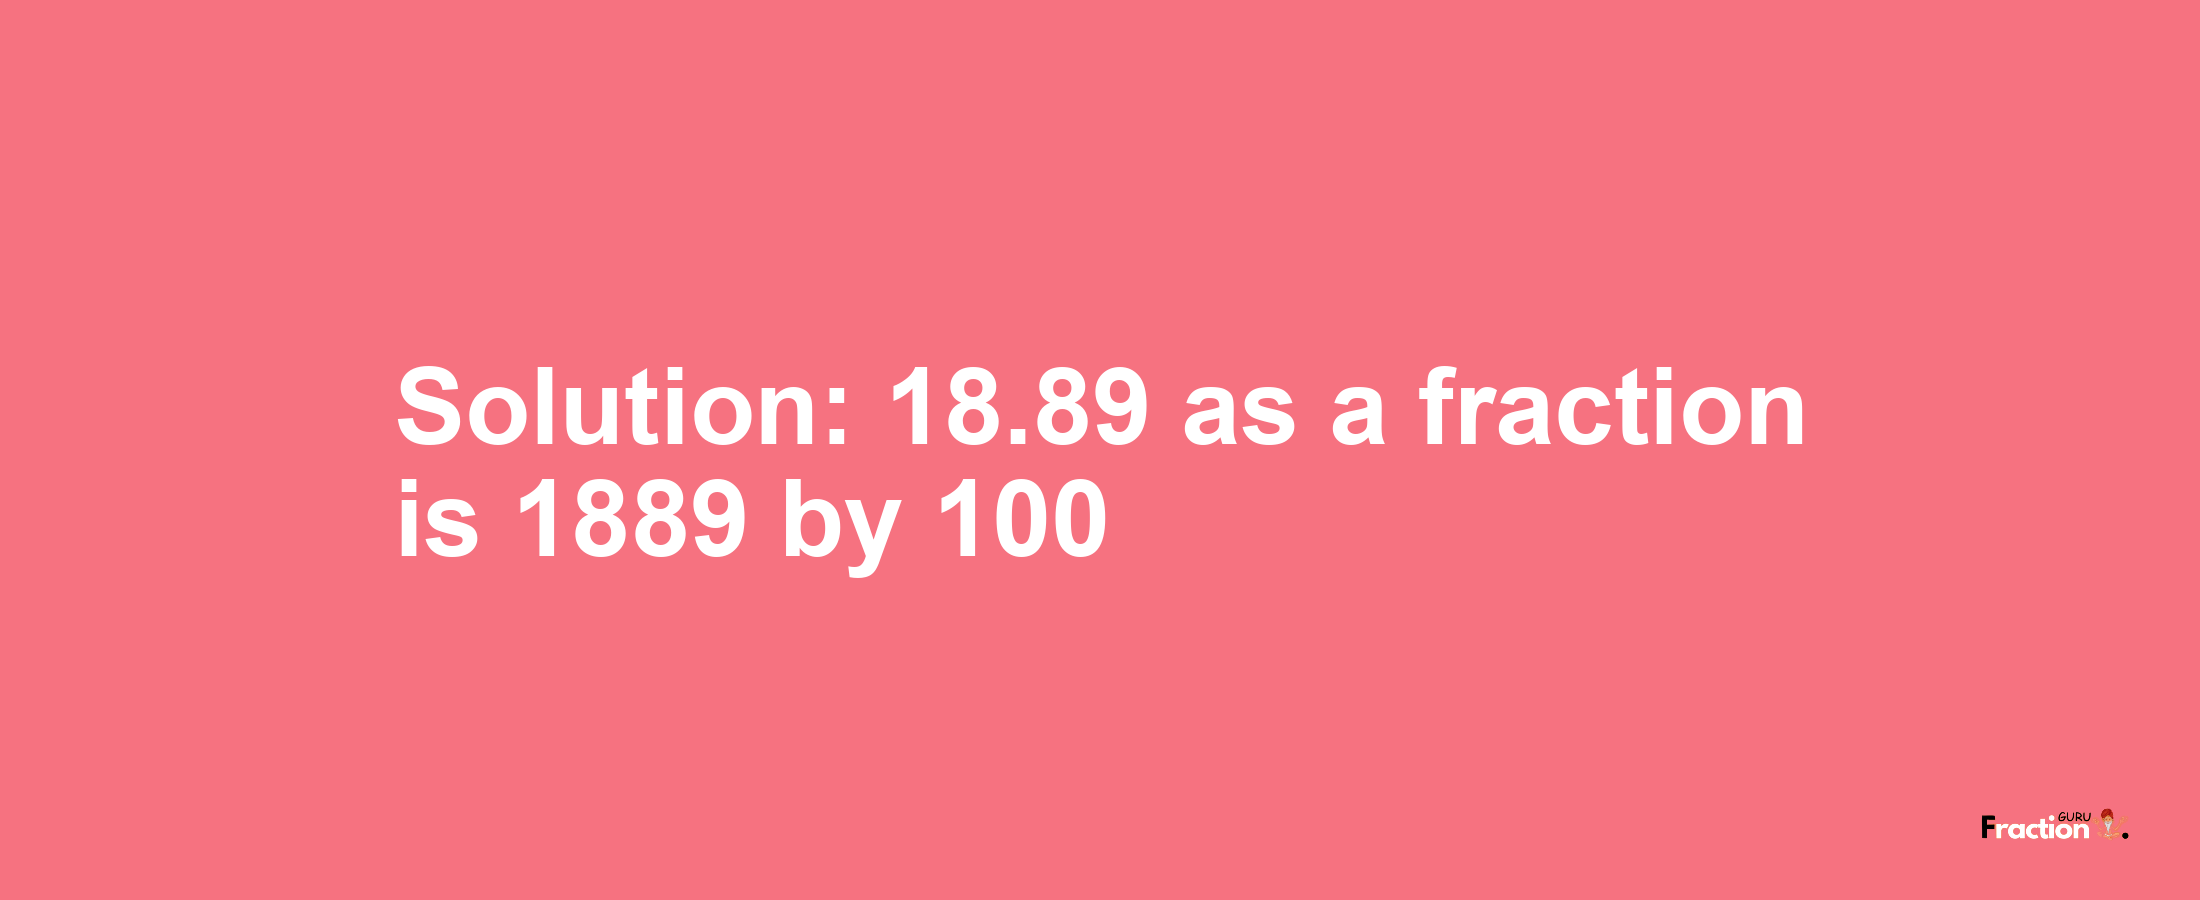 Solution:18.89 as a fraction is 1889/100